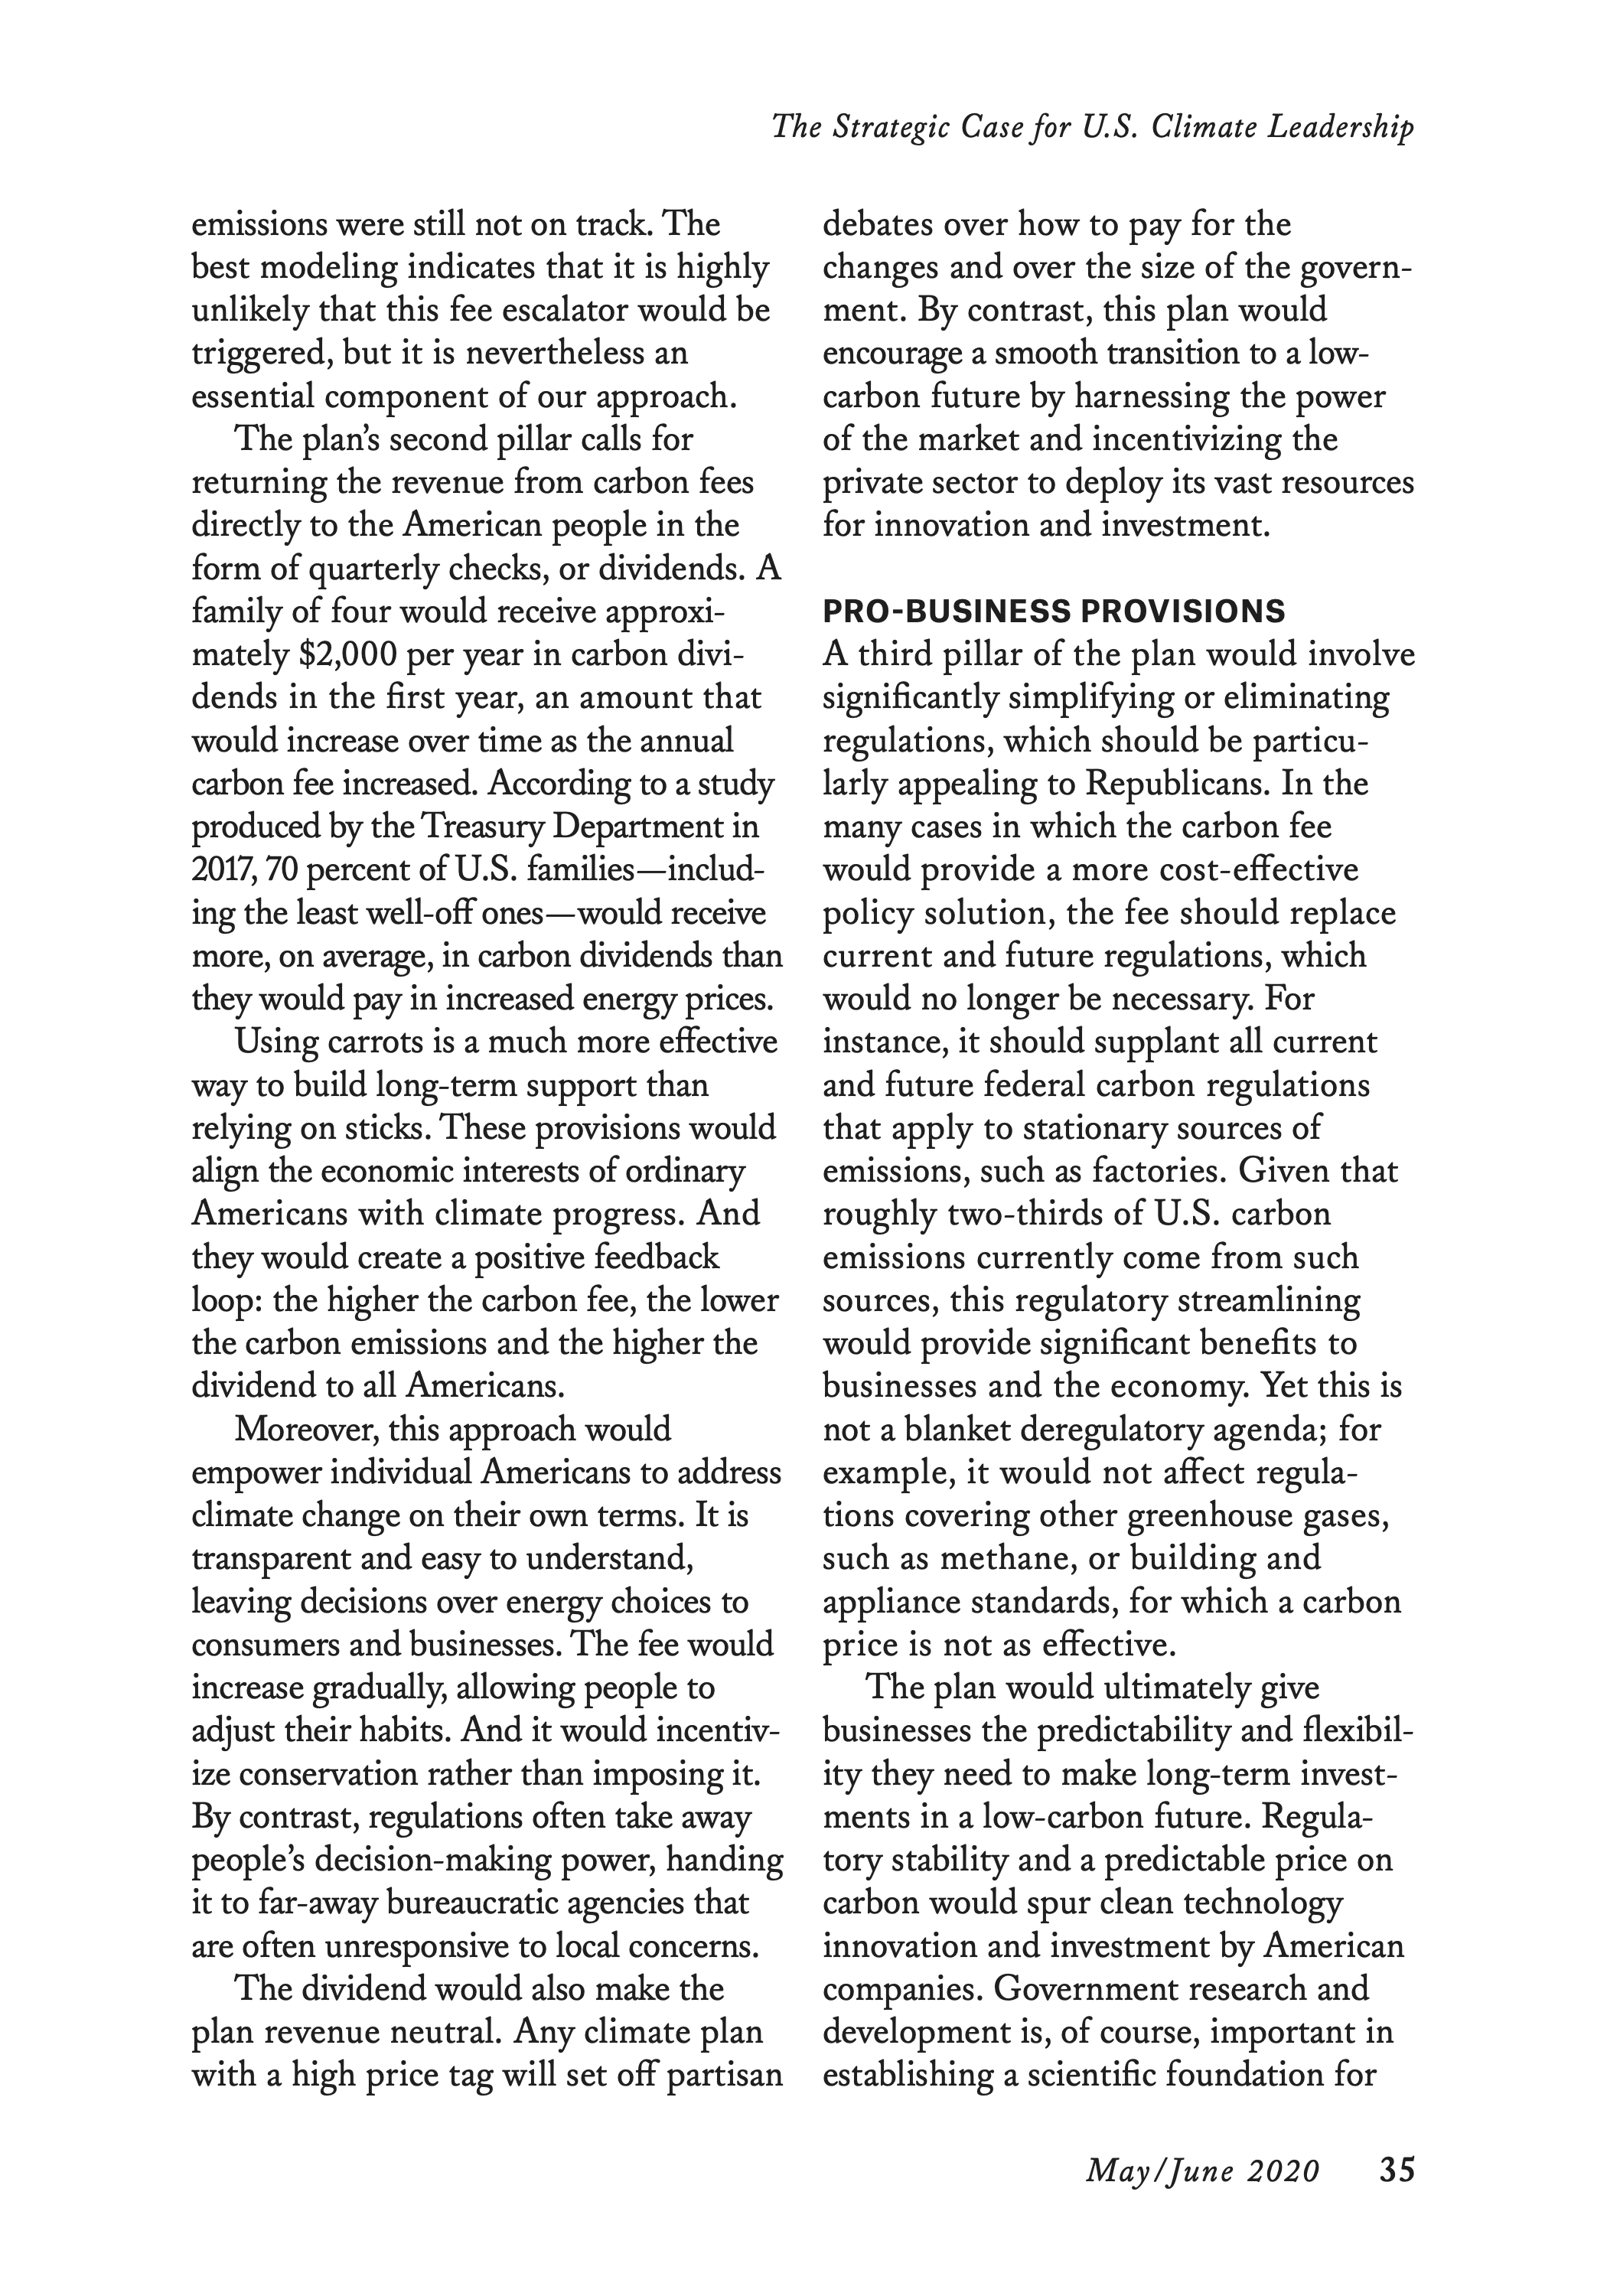 The Strategic Case for U.S. Climate Leadership Page 8.png